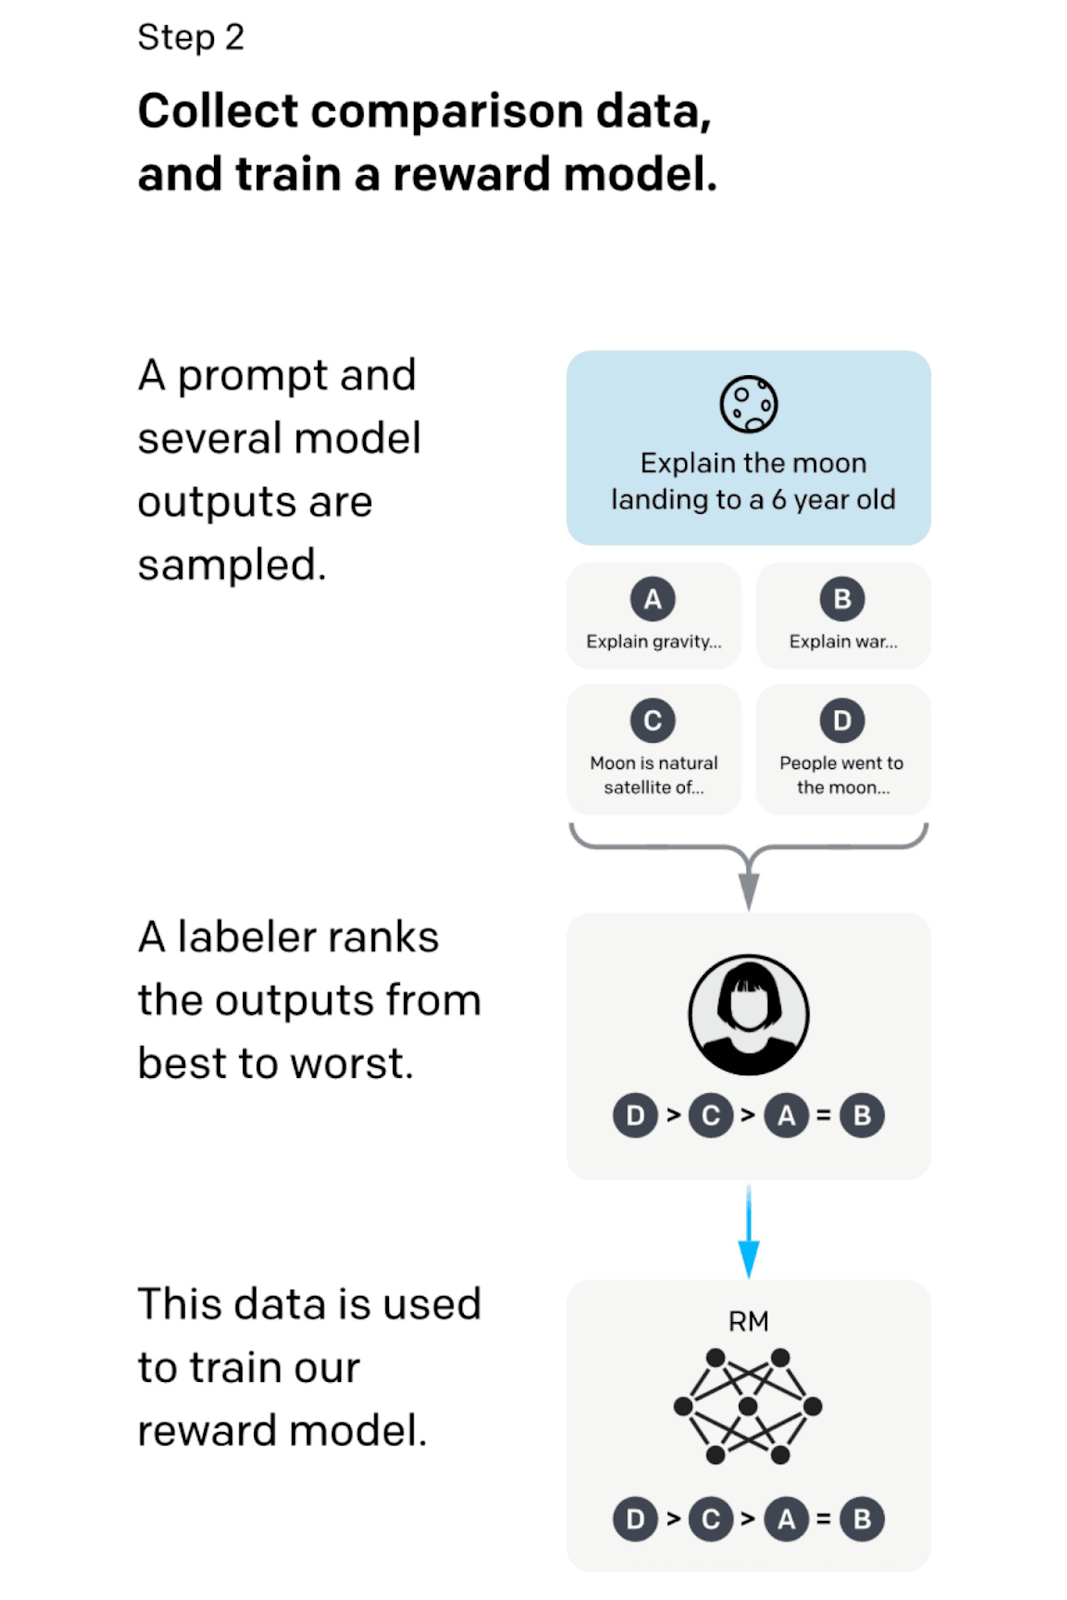 An infographic showing how the reward model works